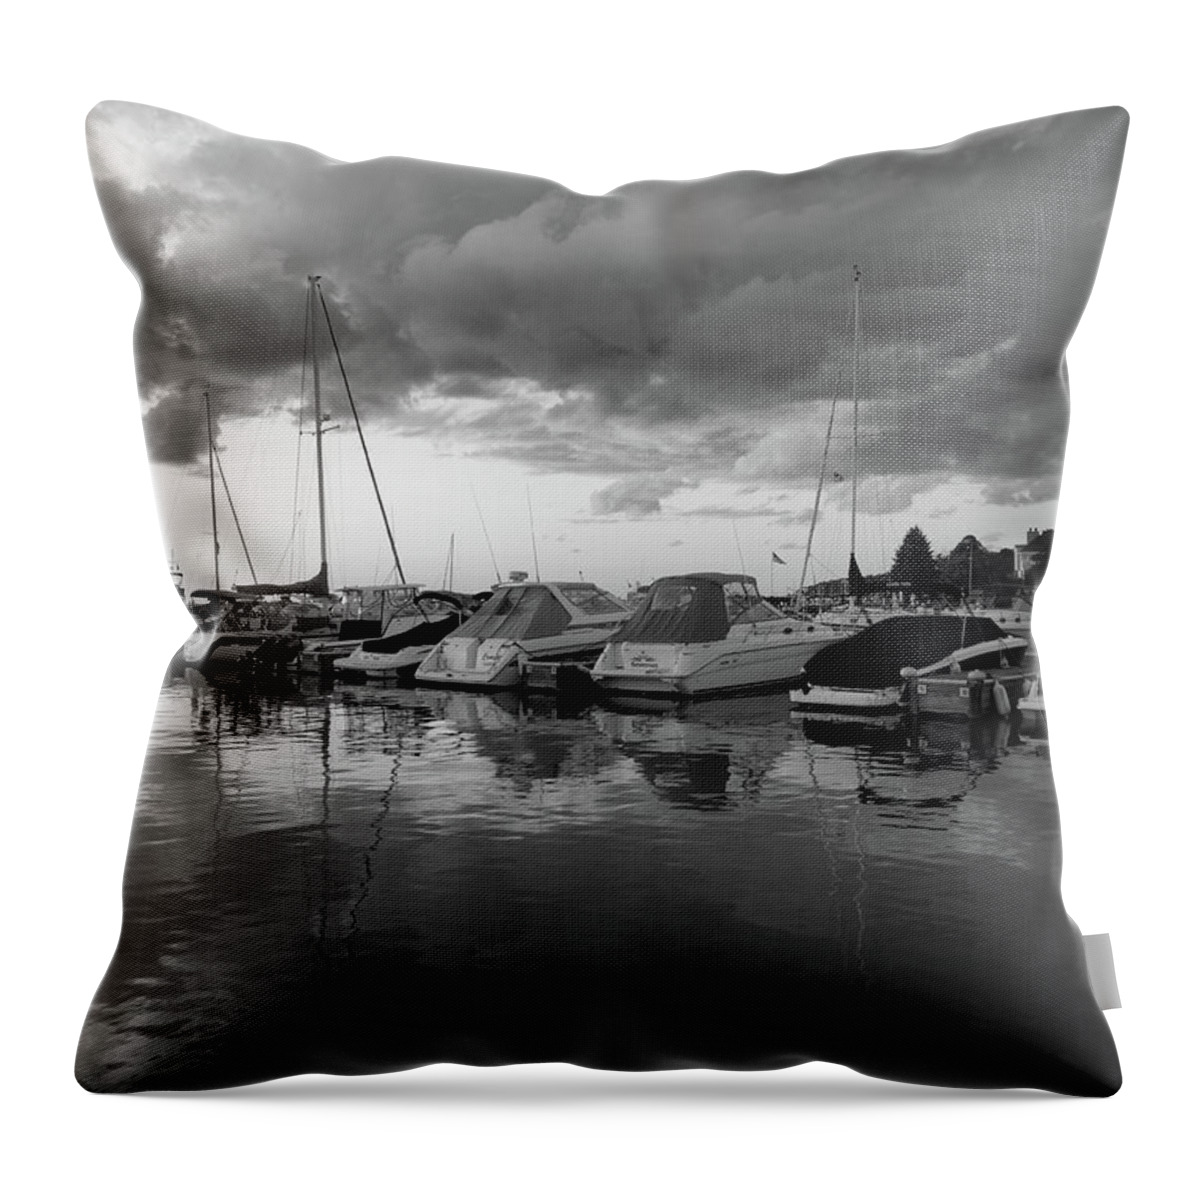 Cloudy Throw Pillow featuring the photograph Cloudy Marina Perspective B W by David T Wilkinson